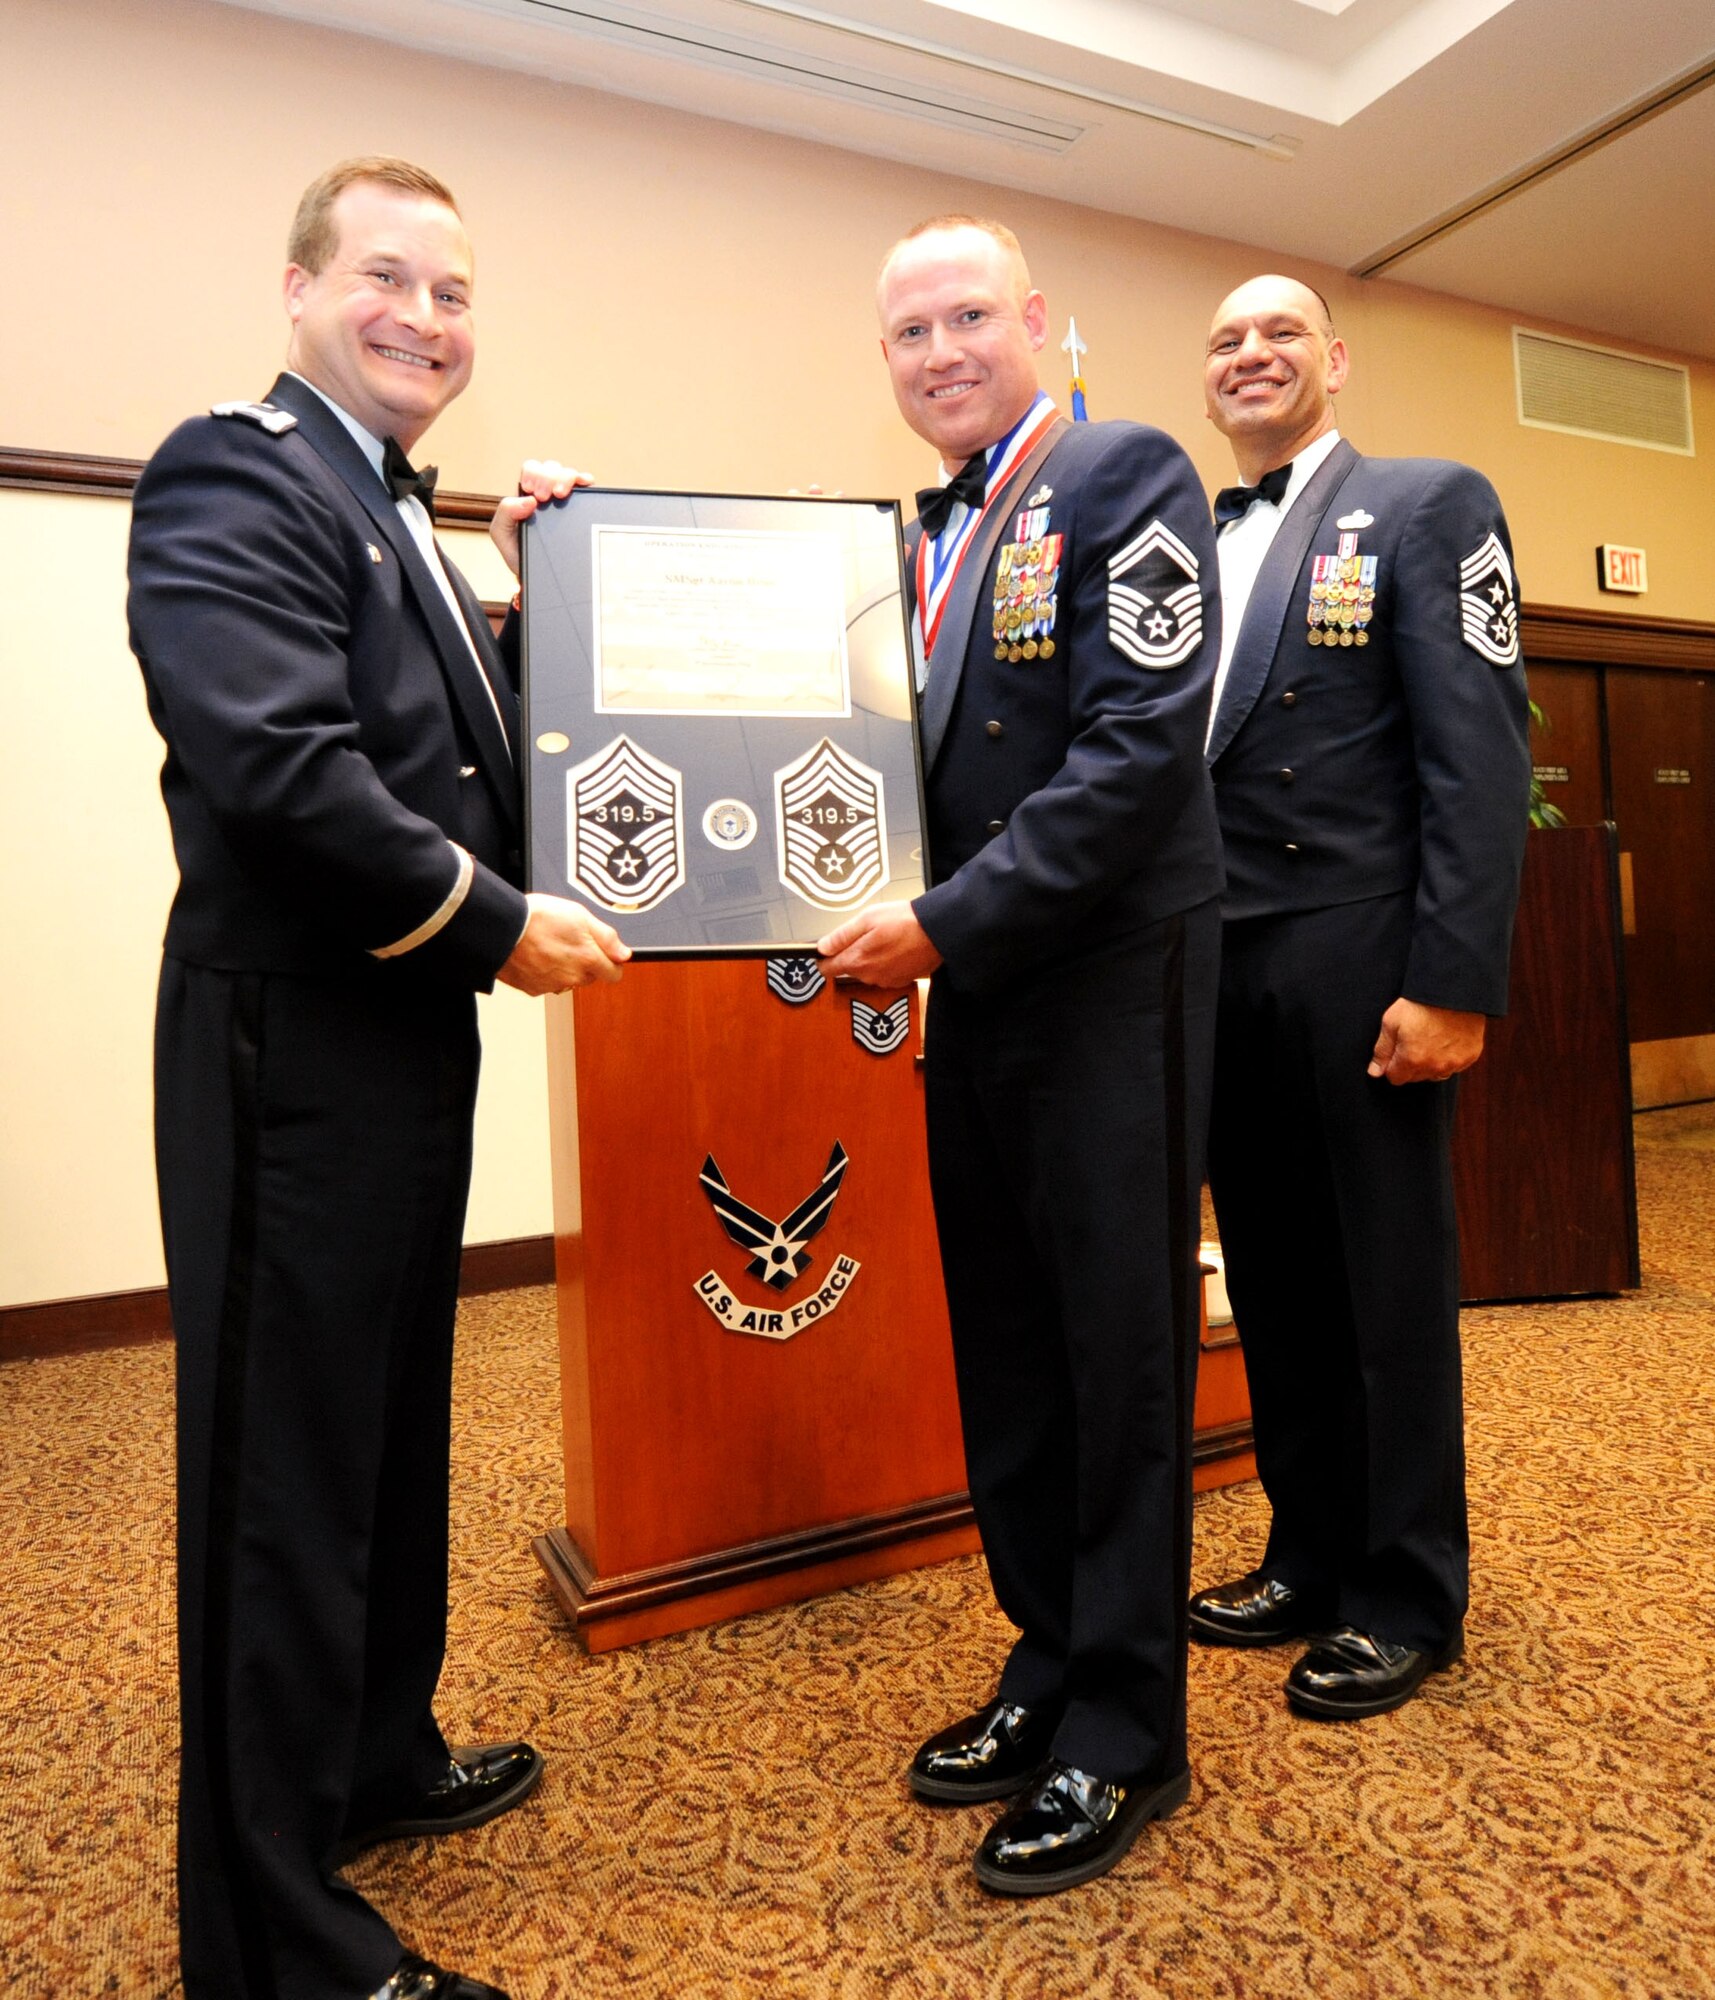 Col. Phil Stewart (left), 9th Reconnaissance Wing commander, and Chief Master Sgt. Robert White, 9th Reconnaissance Wing command chief, present Chief Master Sgt. Aaron Renn, 99th Aircraft Maintenance Unit superintendant, a plaque commemorating his promotion at the Recce Point Club on Beale Air Force Base, Calif., April 8, 2013. (U.S. Air Force photo by Airman 1st Class Bobby Cummings/Released)